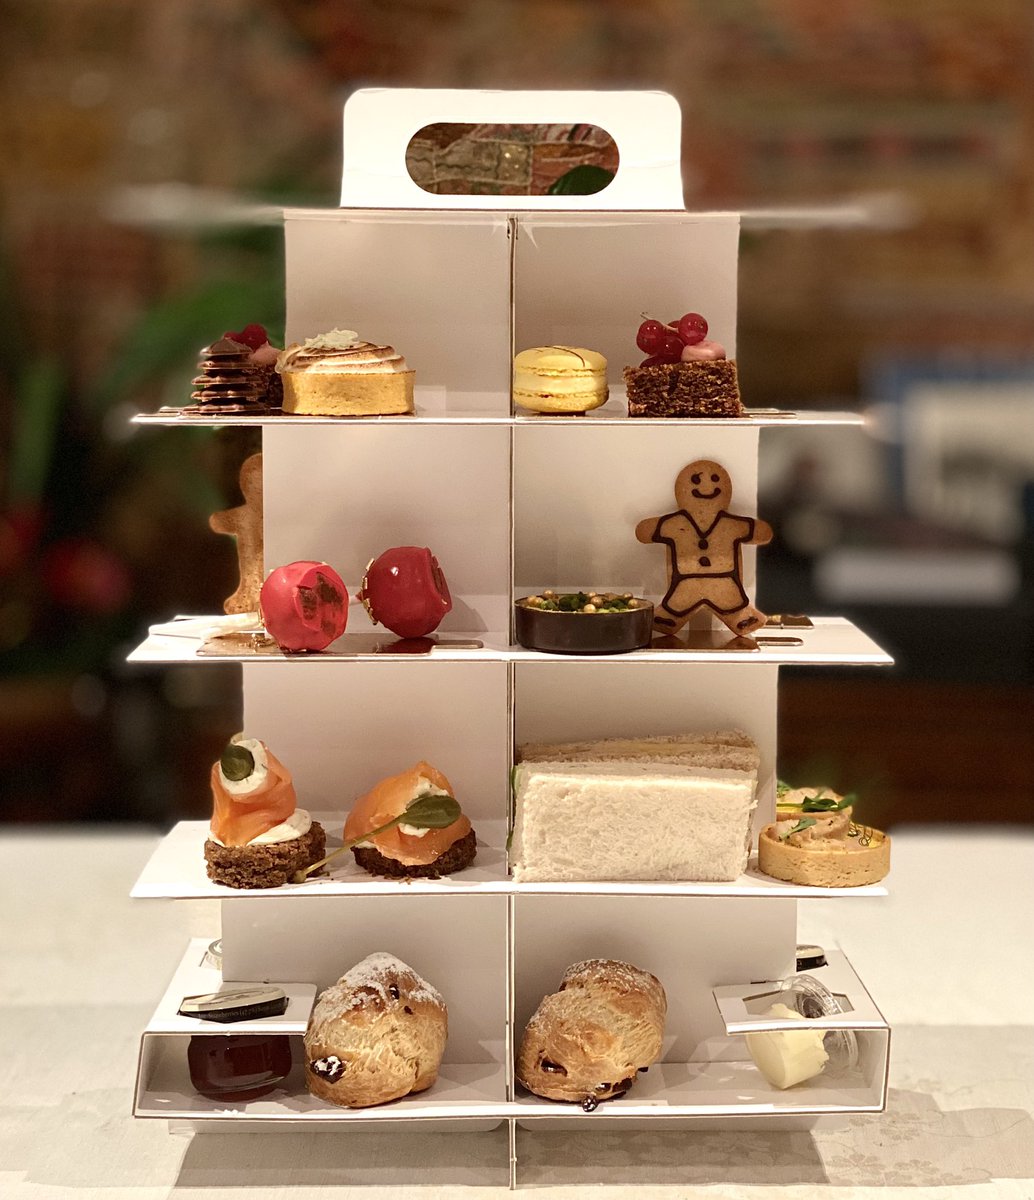 How spectacularly beautiful is this? Festive afternoon tea delivered by @ConradDublin An amazing gift to send a loved one. Thank you so much for the press sample @INSPIREPR1